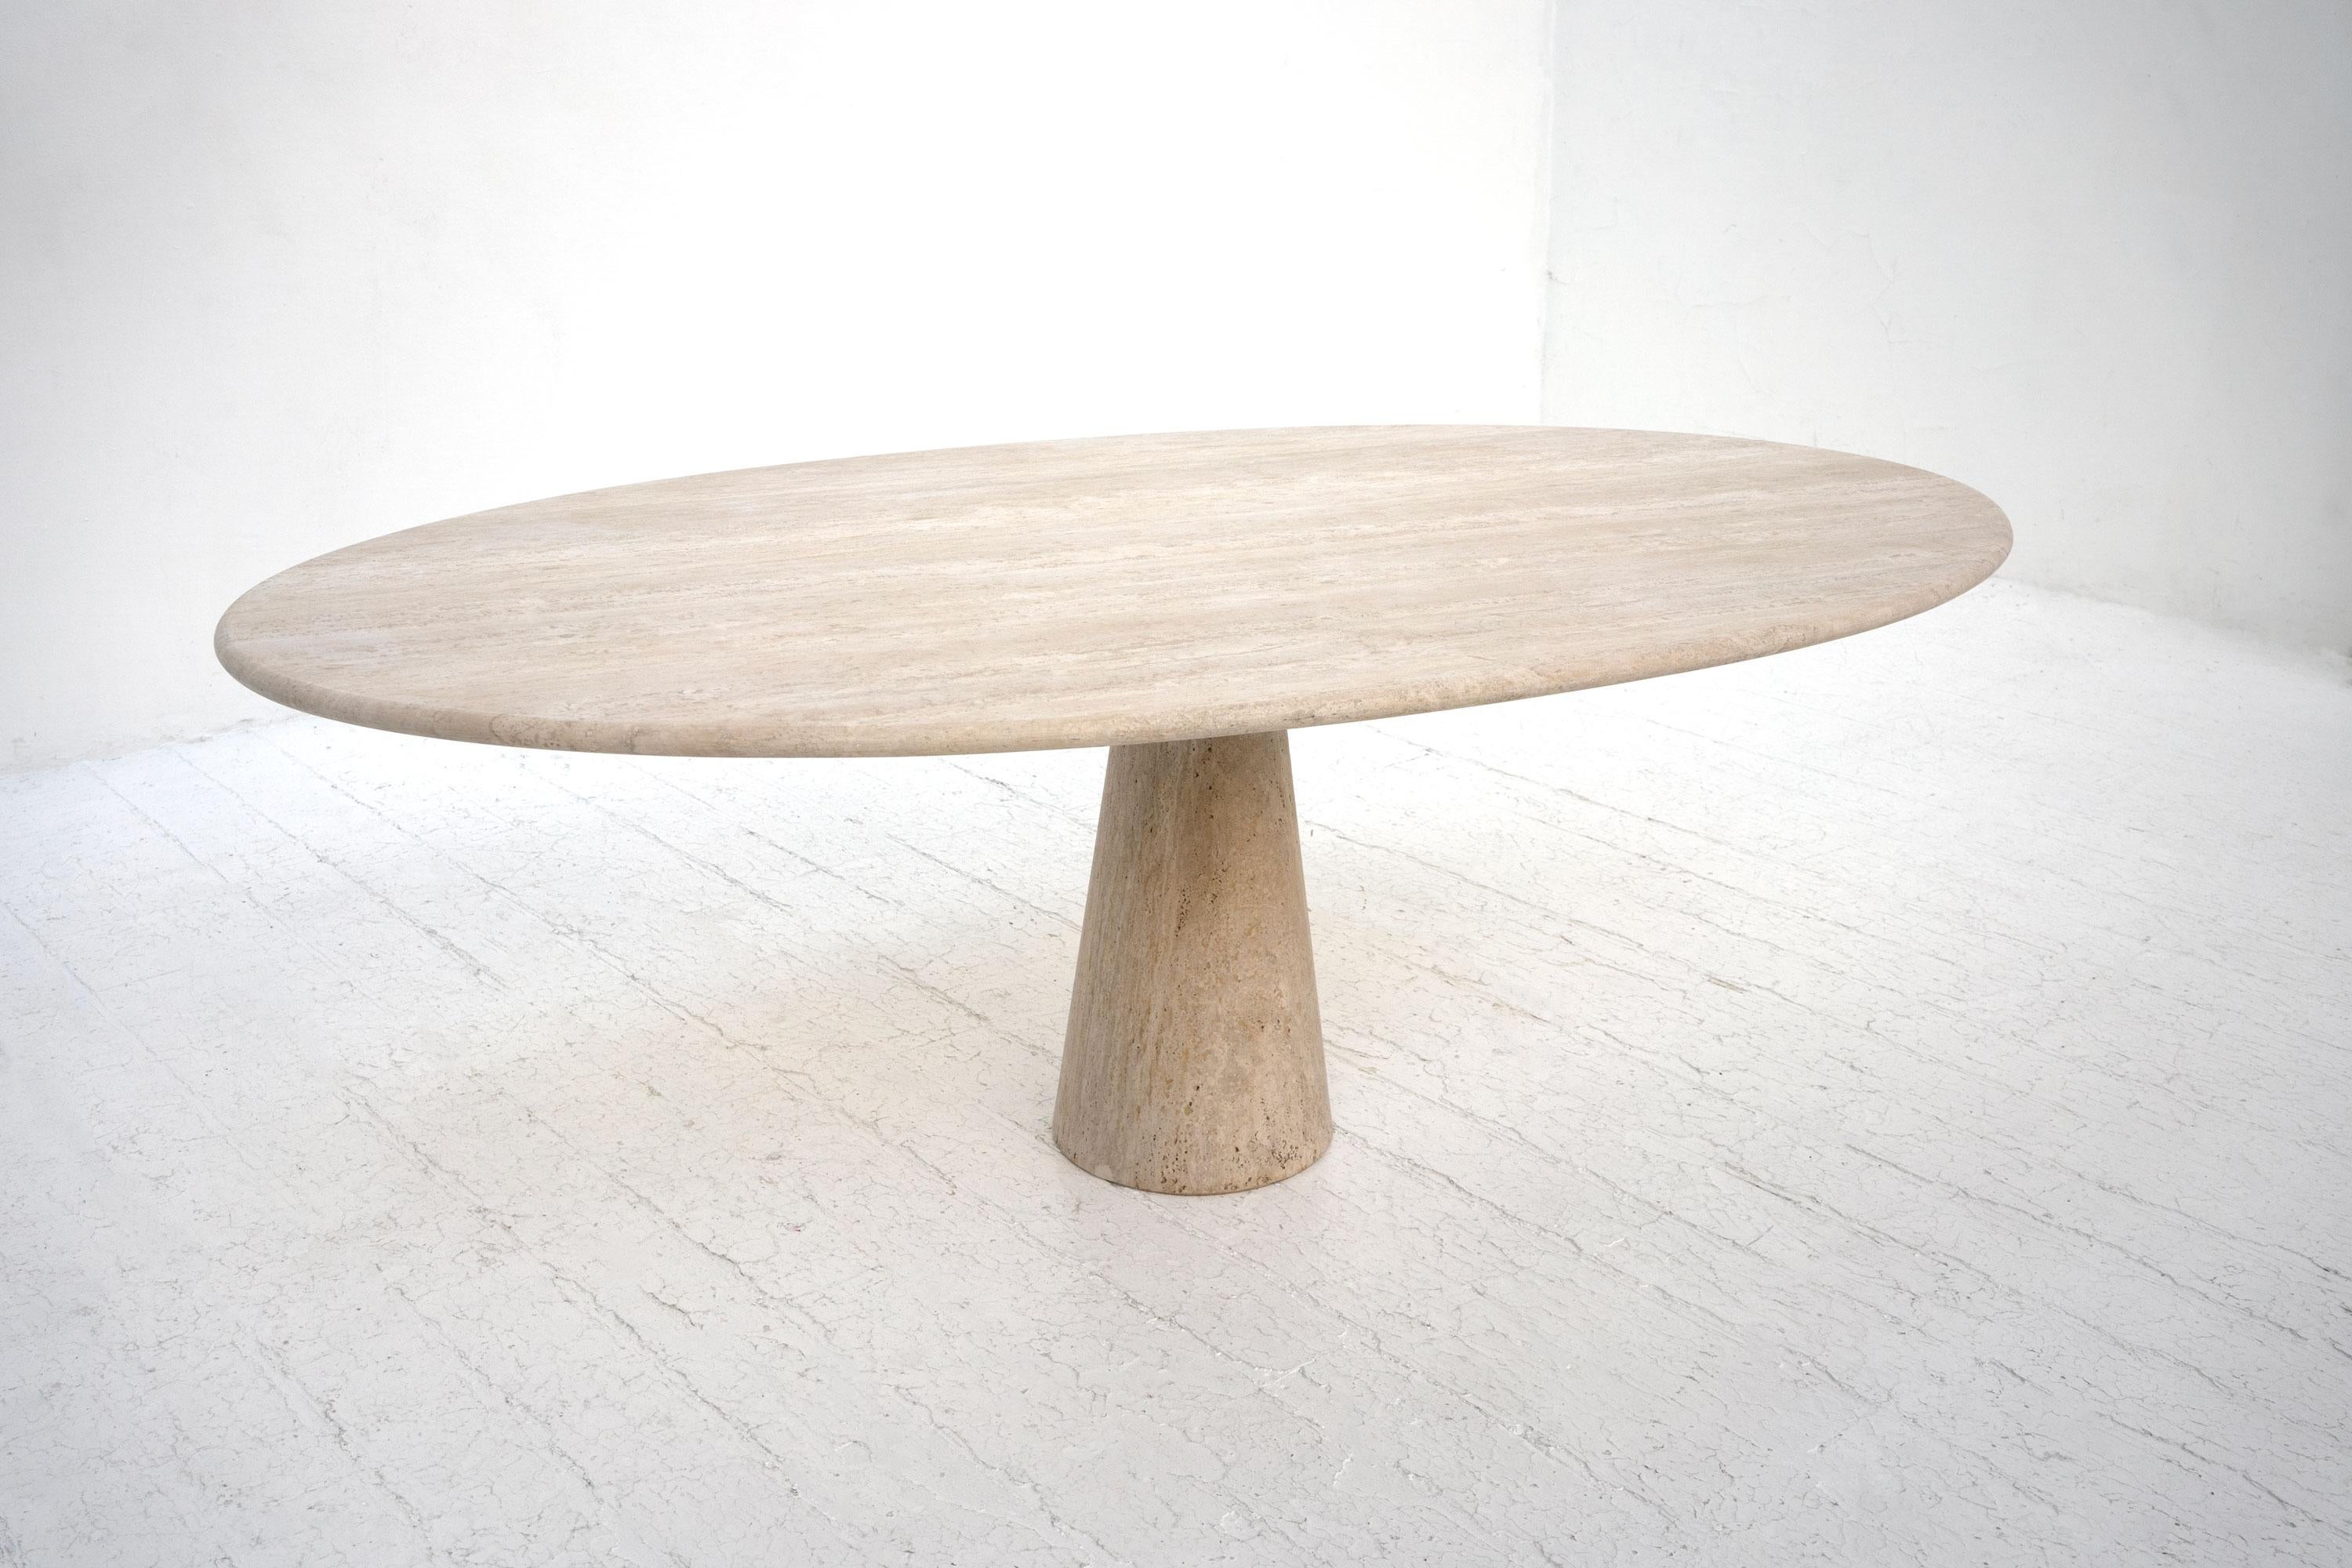 A large travertine dining table manufactured in Italy, c.1970. Composed from a solid travertine conical base supporting an oval travertine top. 

Seats 6 - 8

Dimensions (cm, approx):
Height: 73
Width: 120
Depth: 195
